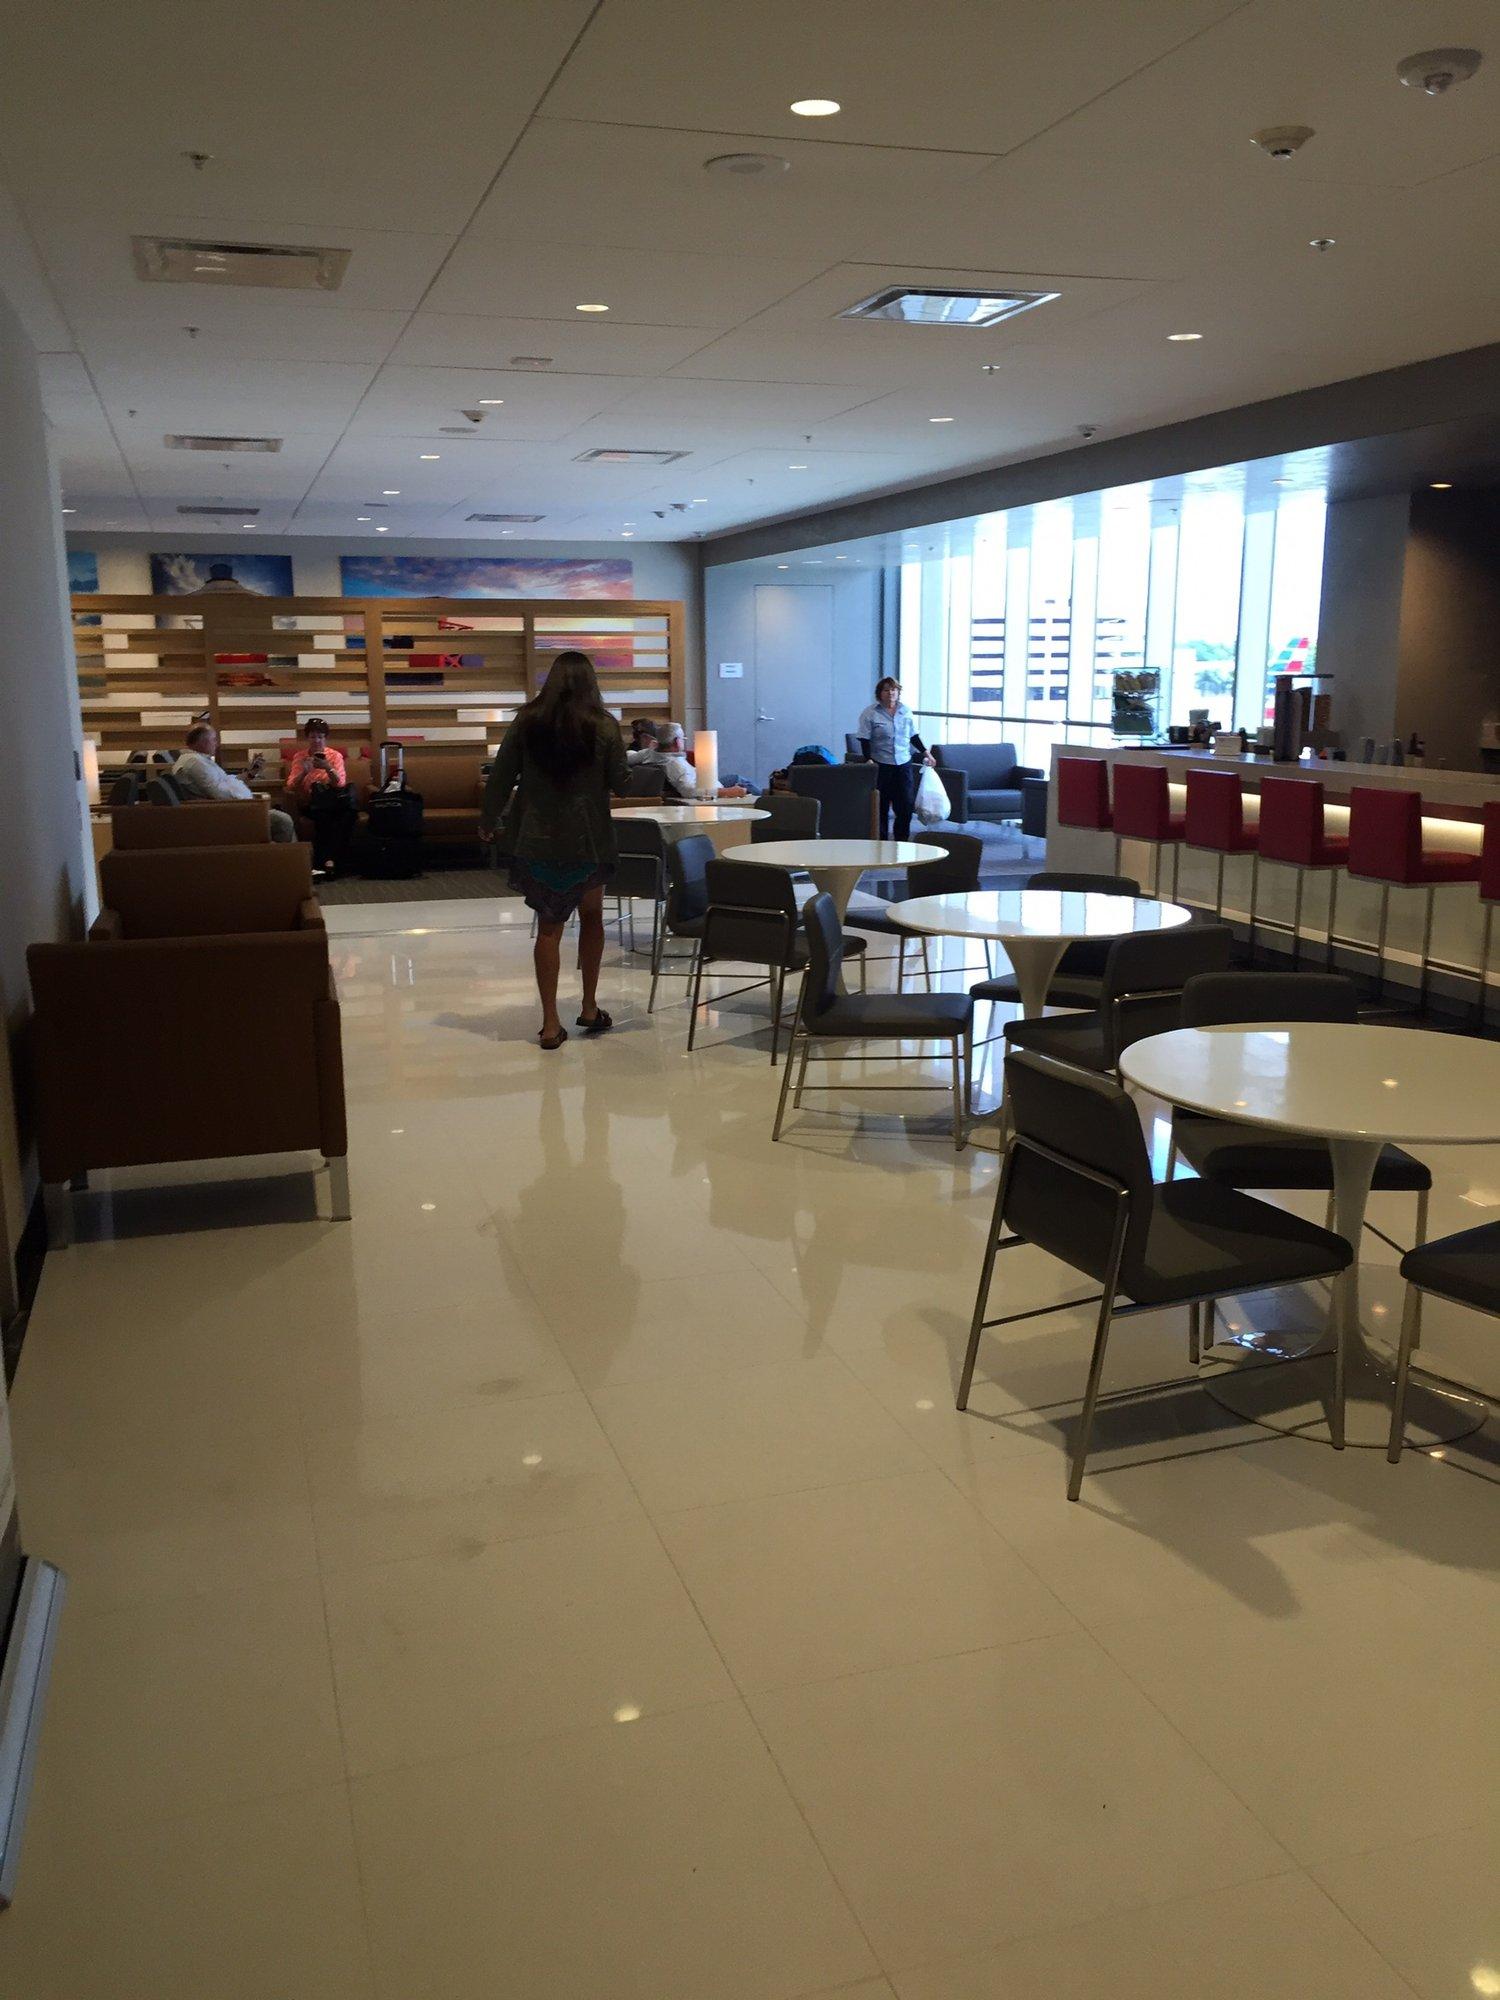 American Airlines Admirals Club (Gate D15) image 12 of 25